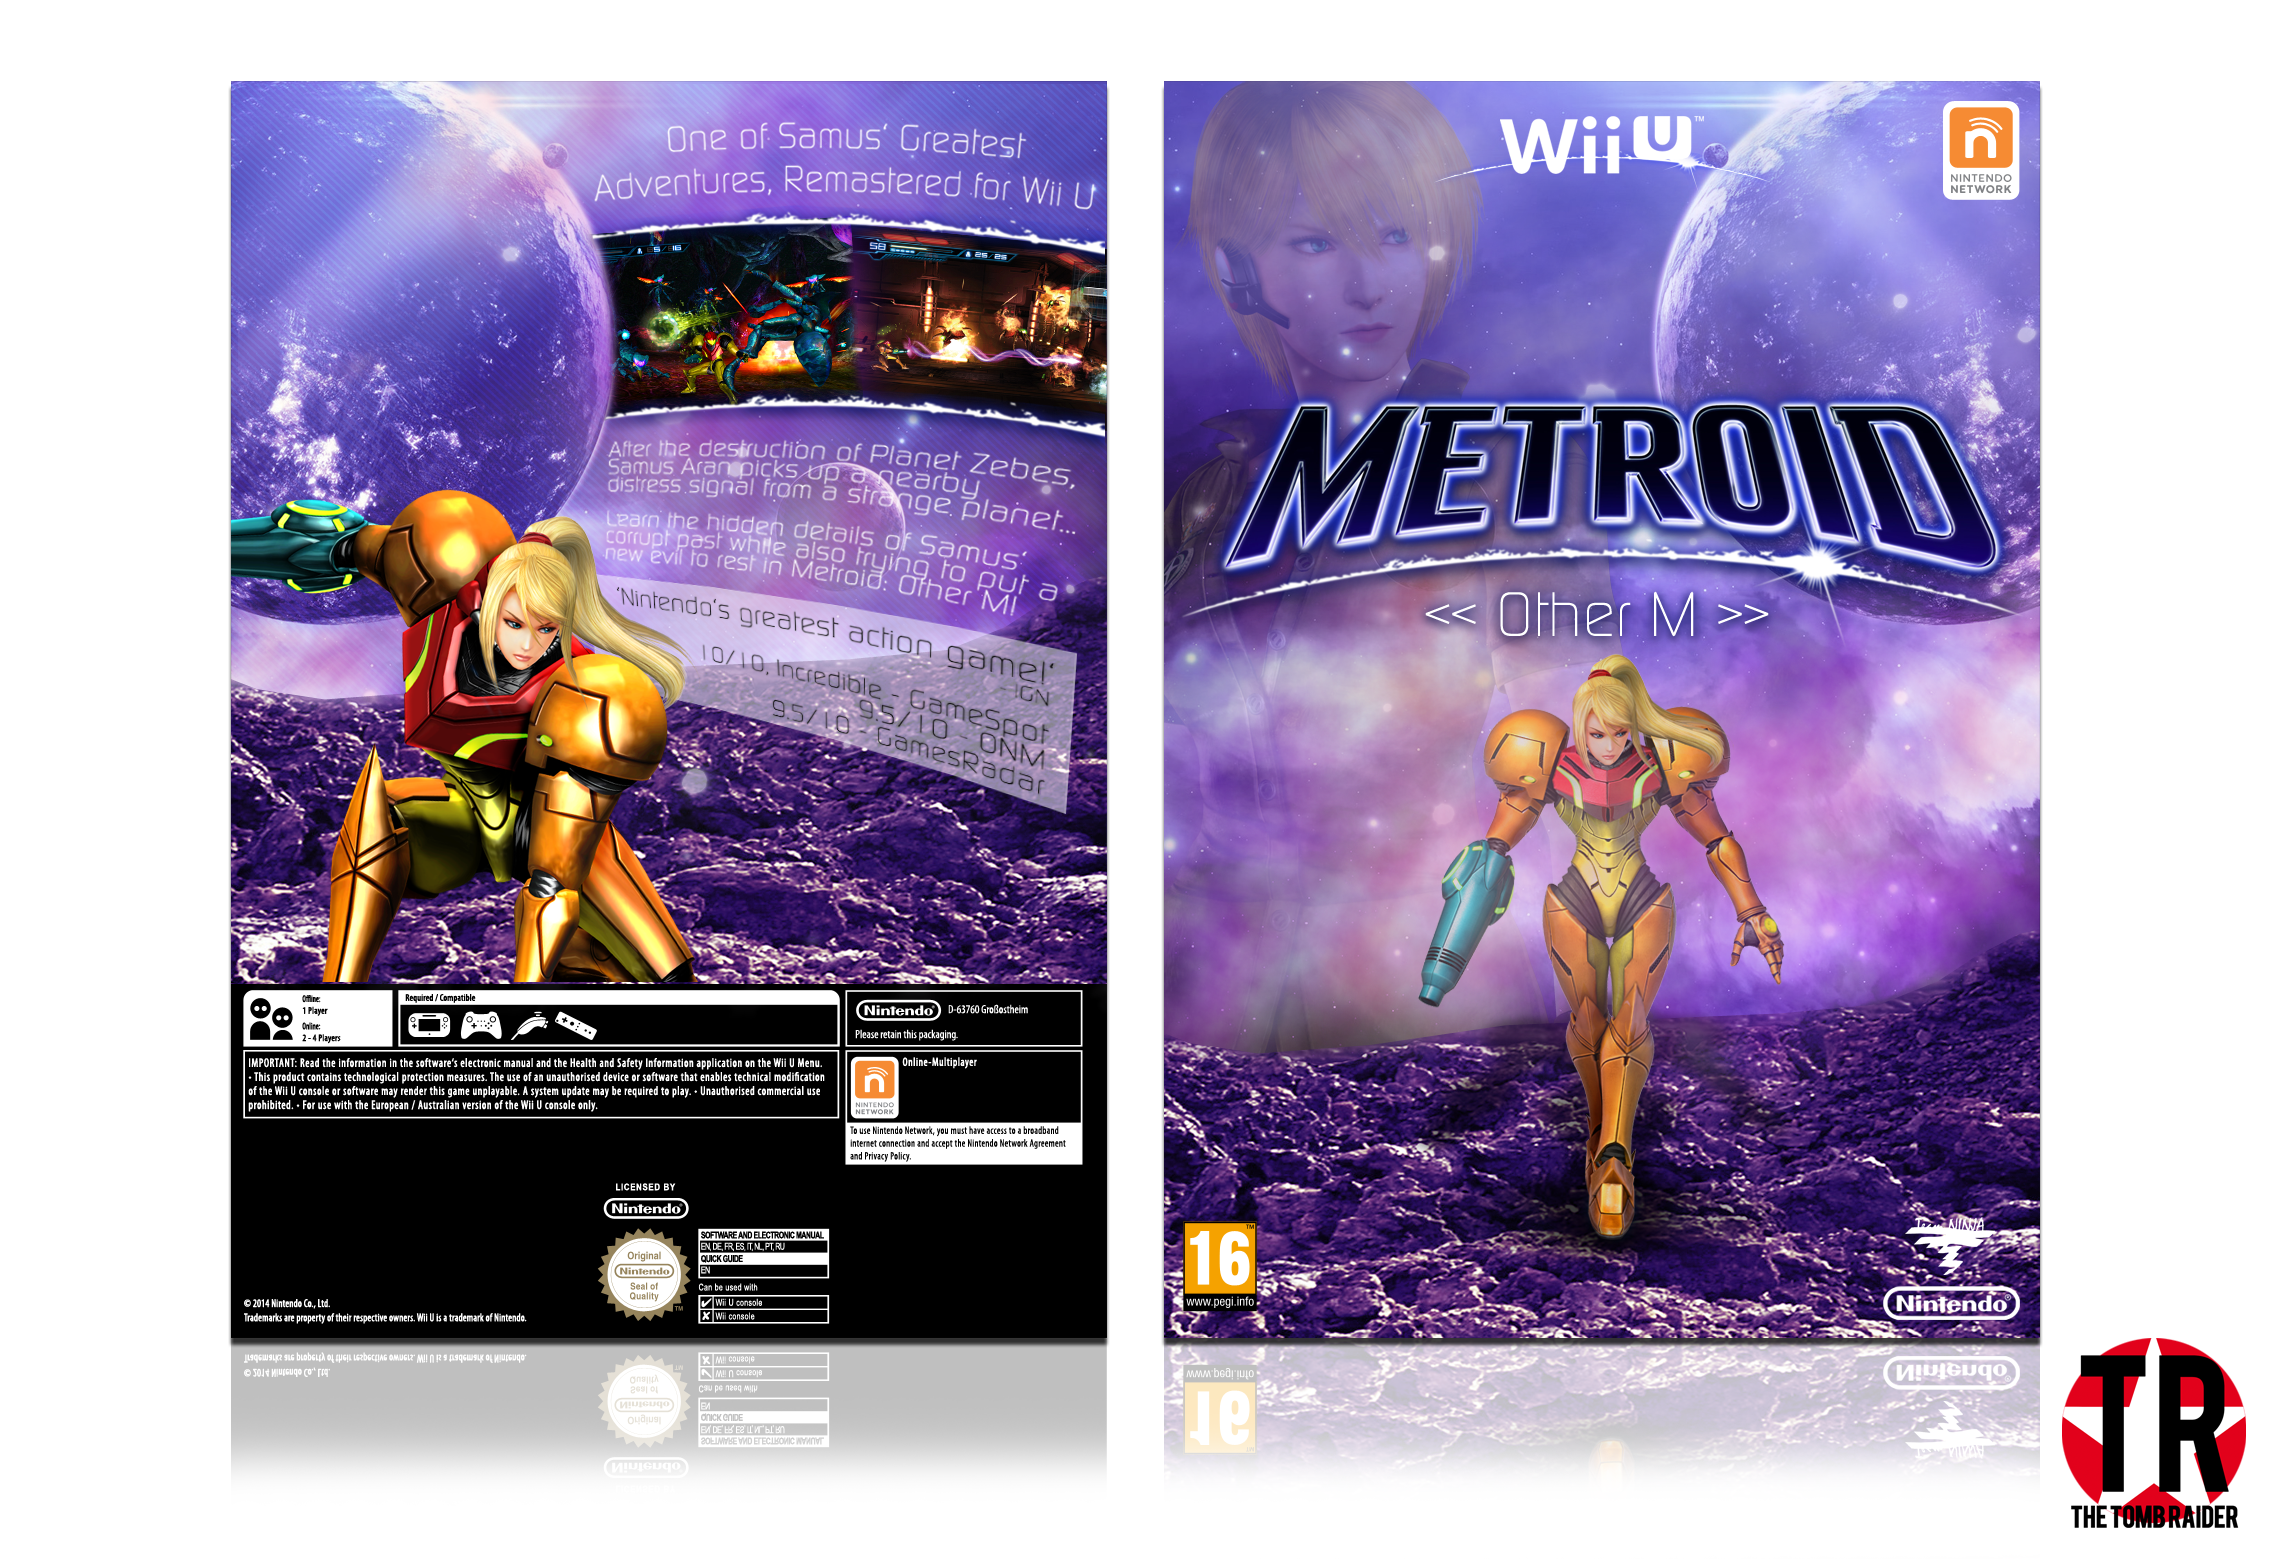 Metroid: Other M HD box cover